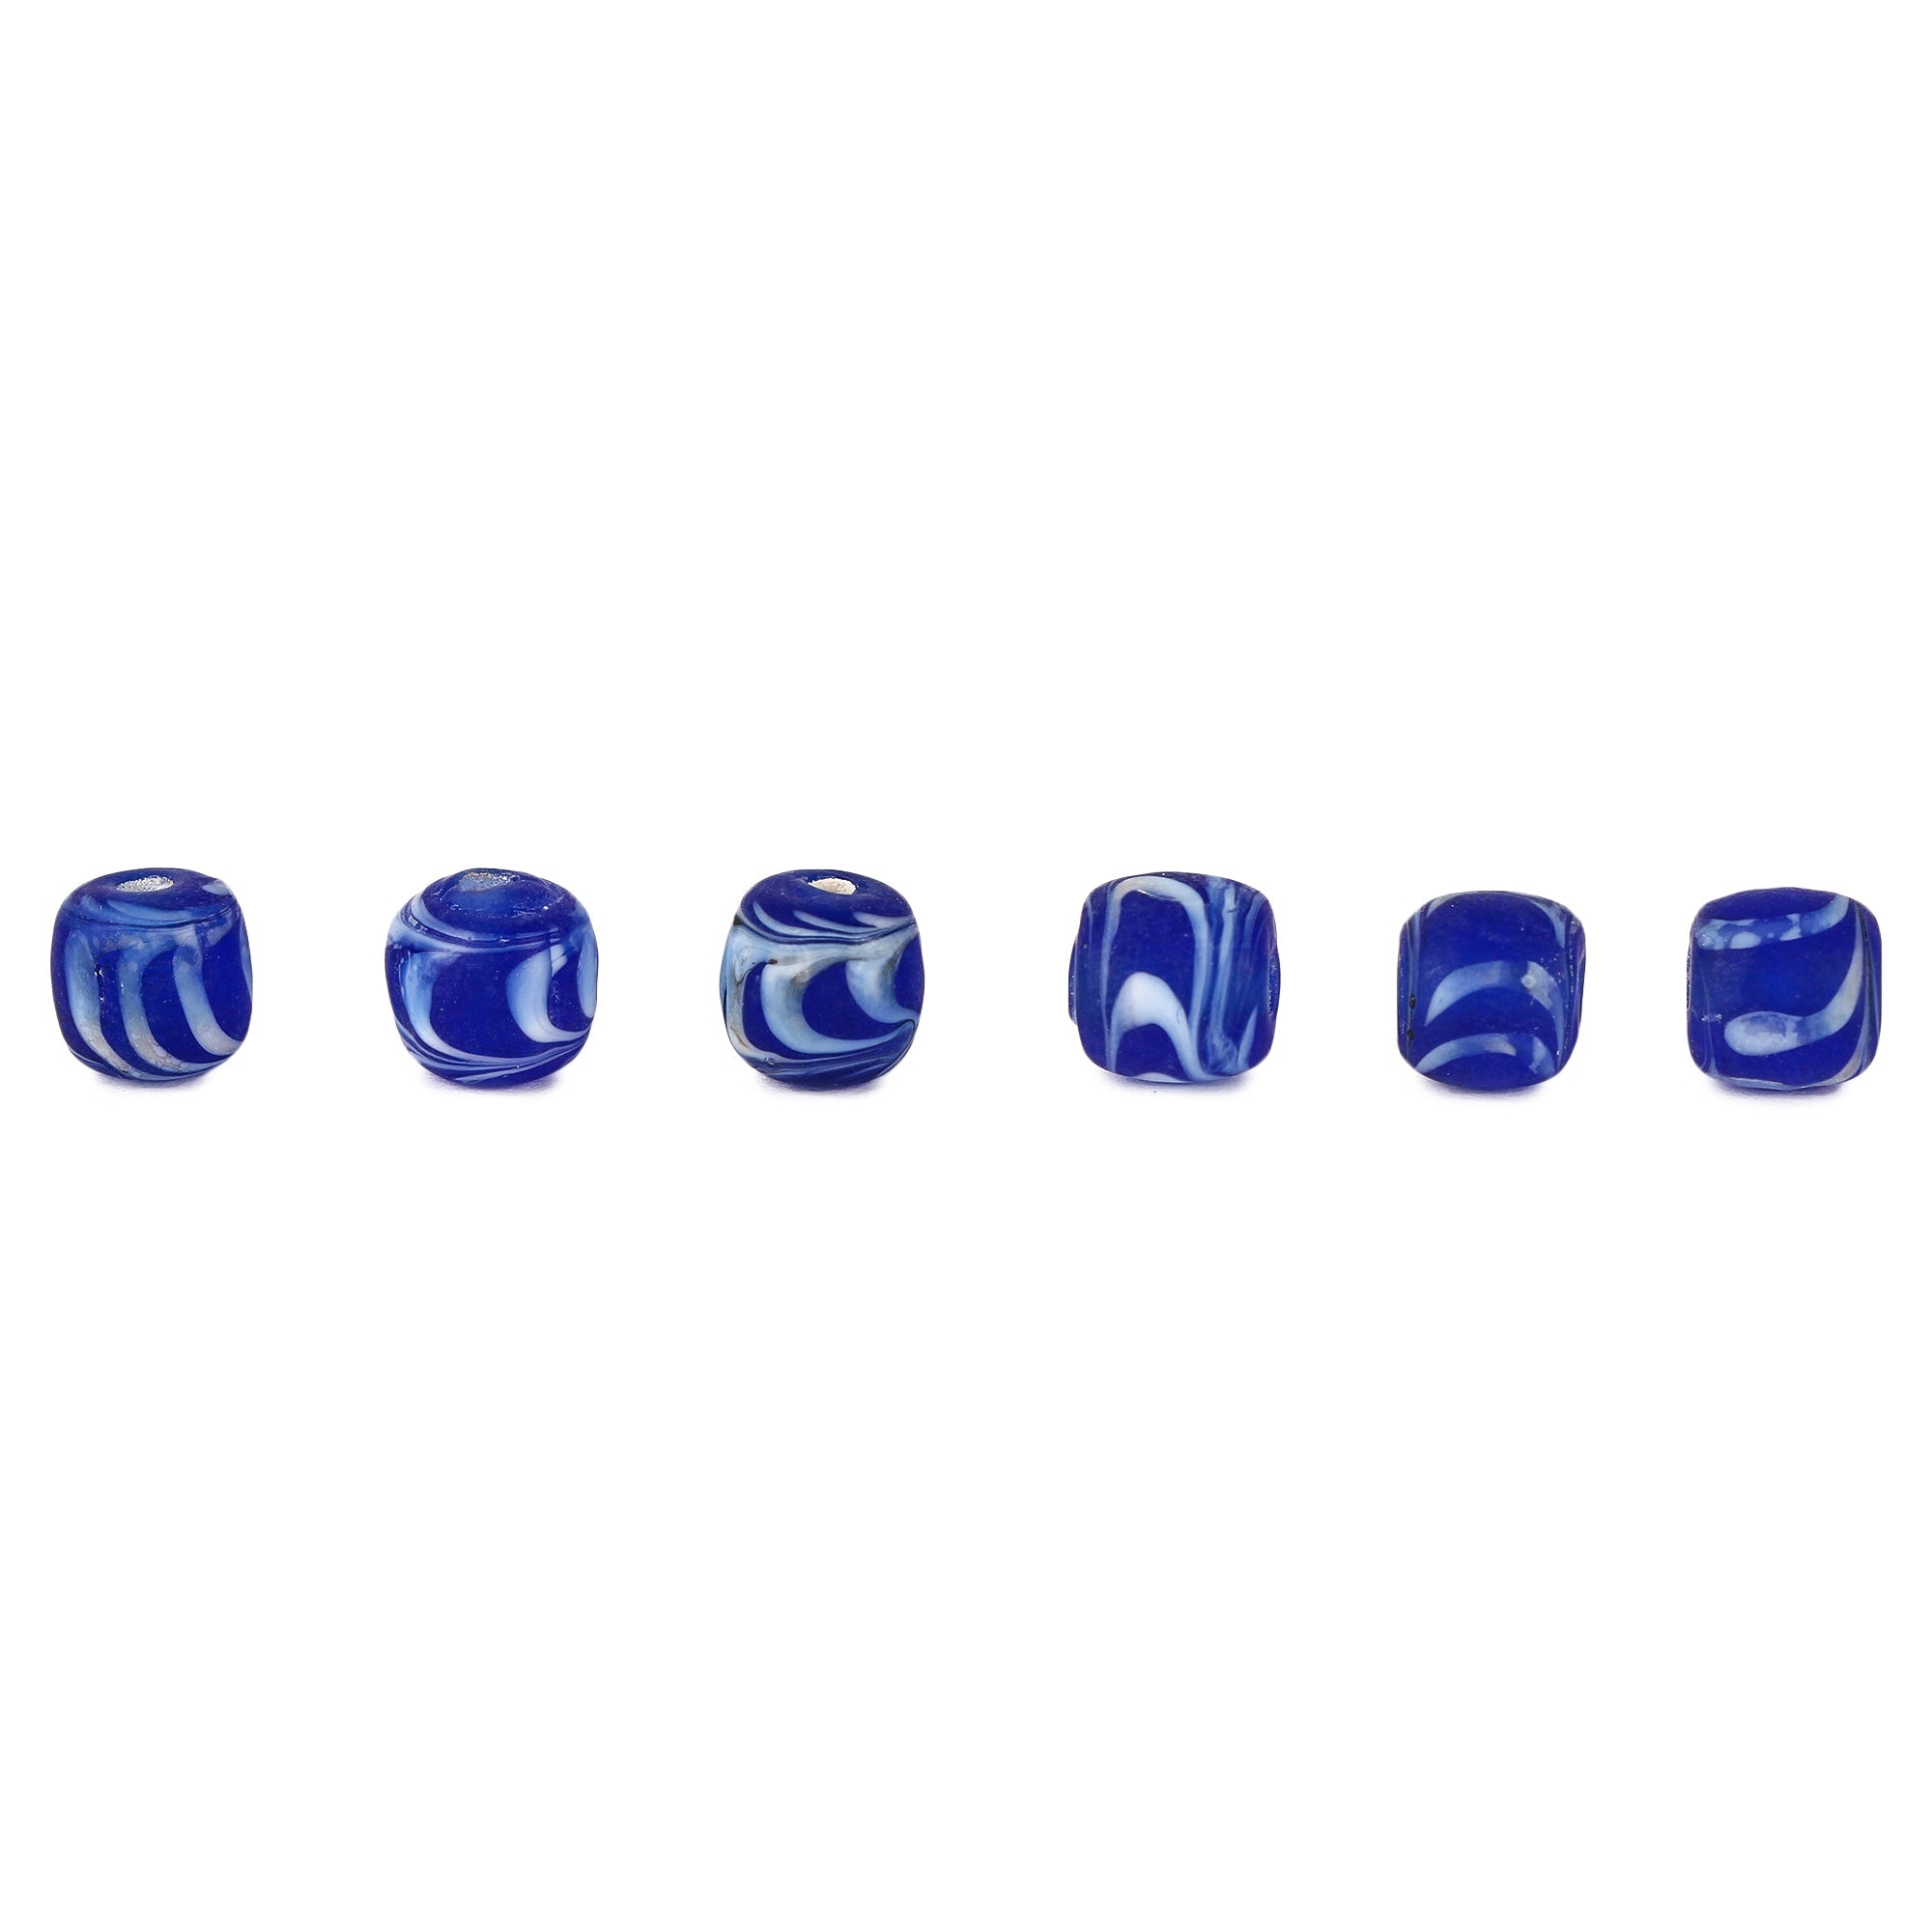 Blue glass bead with white decoration